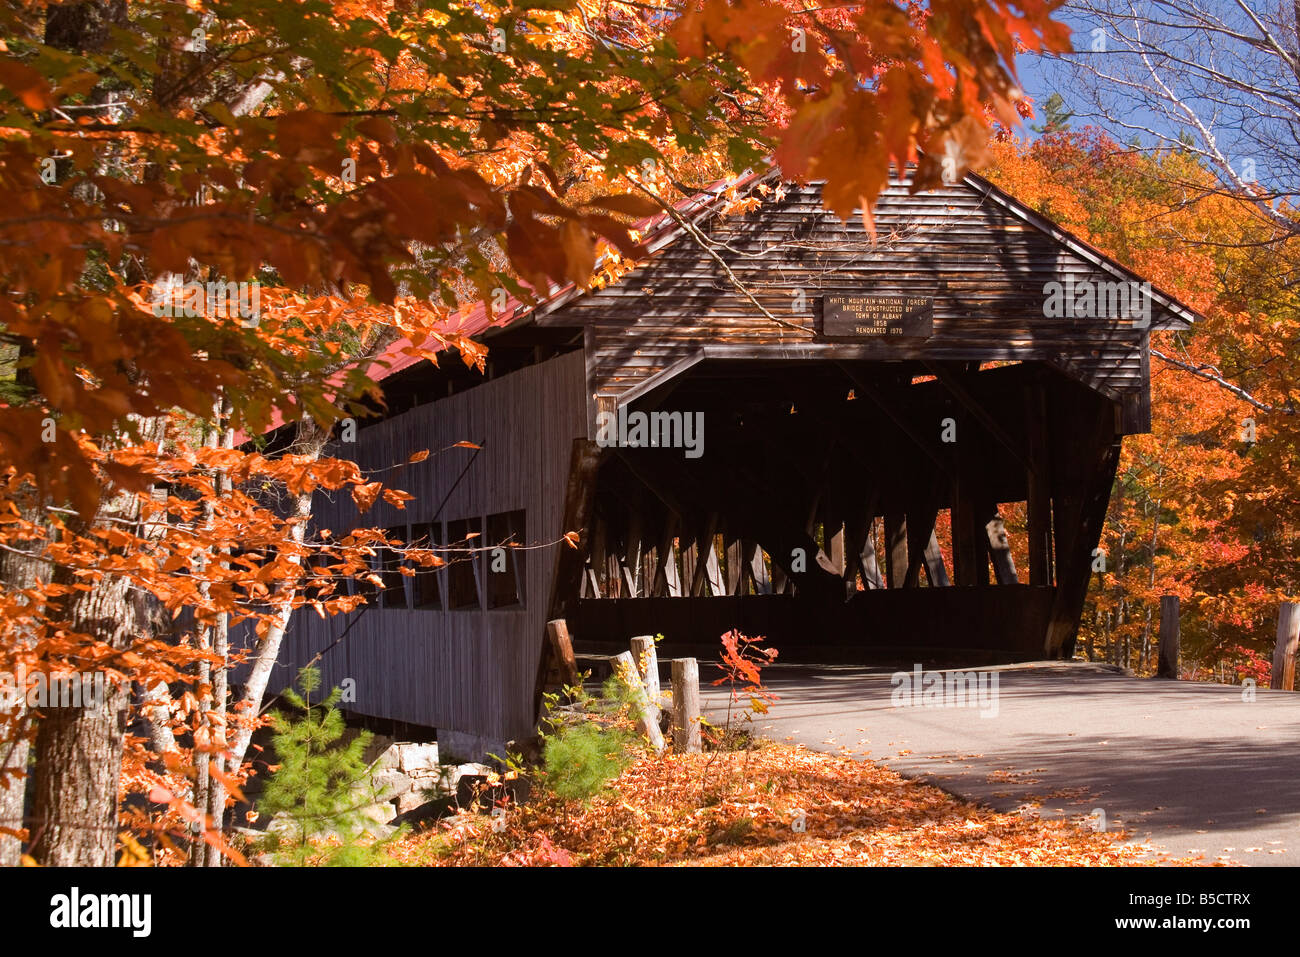 The Albany covered bridge is located on the Kankamagus Highway in the White Mountains of New Hampshire. Stock Photo